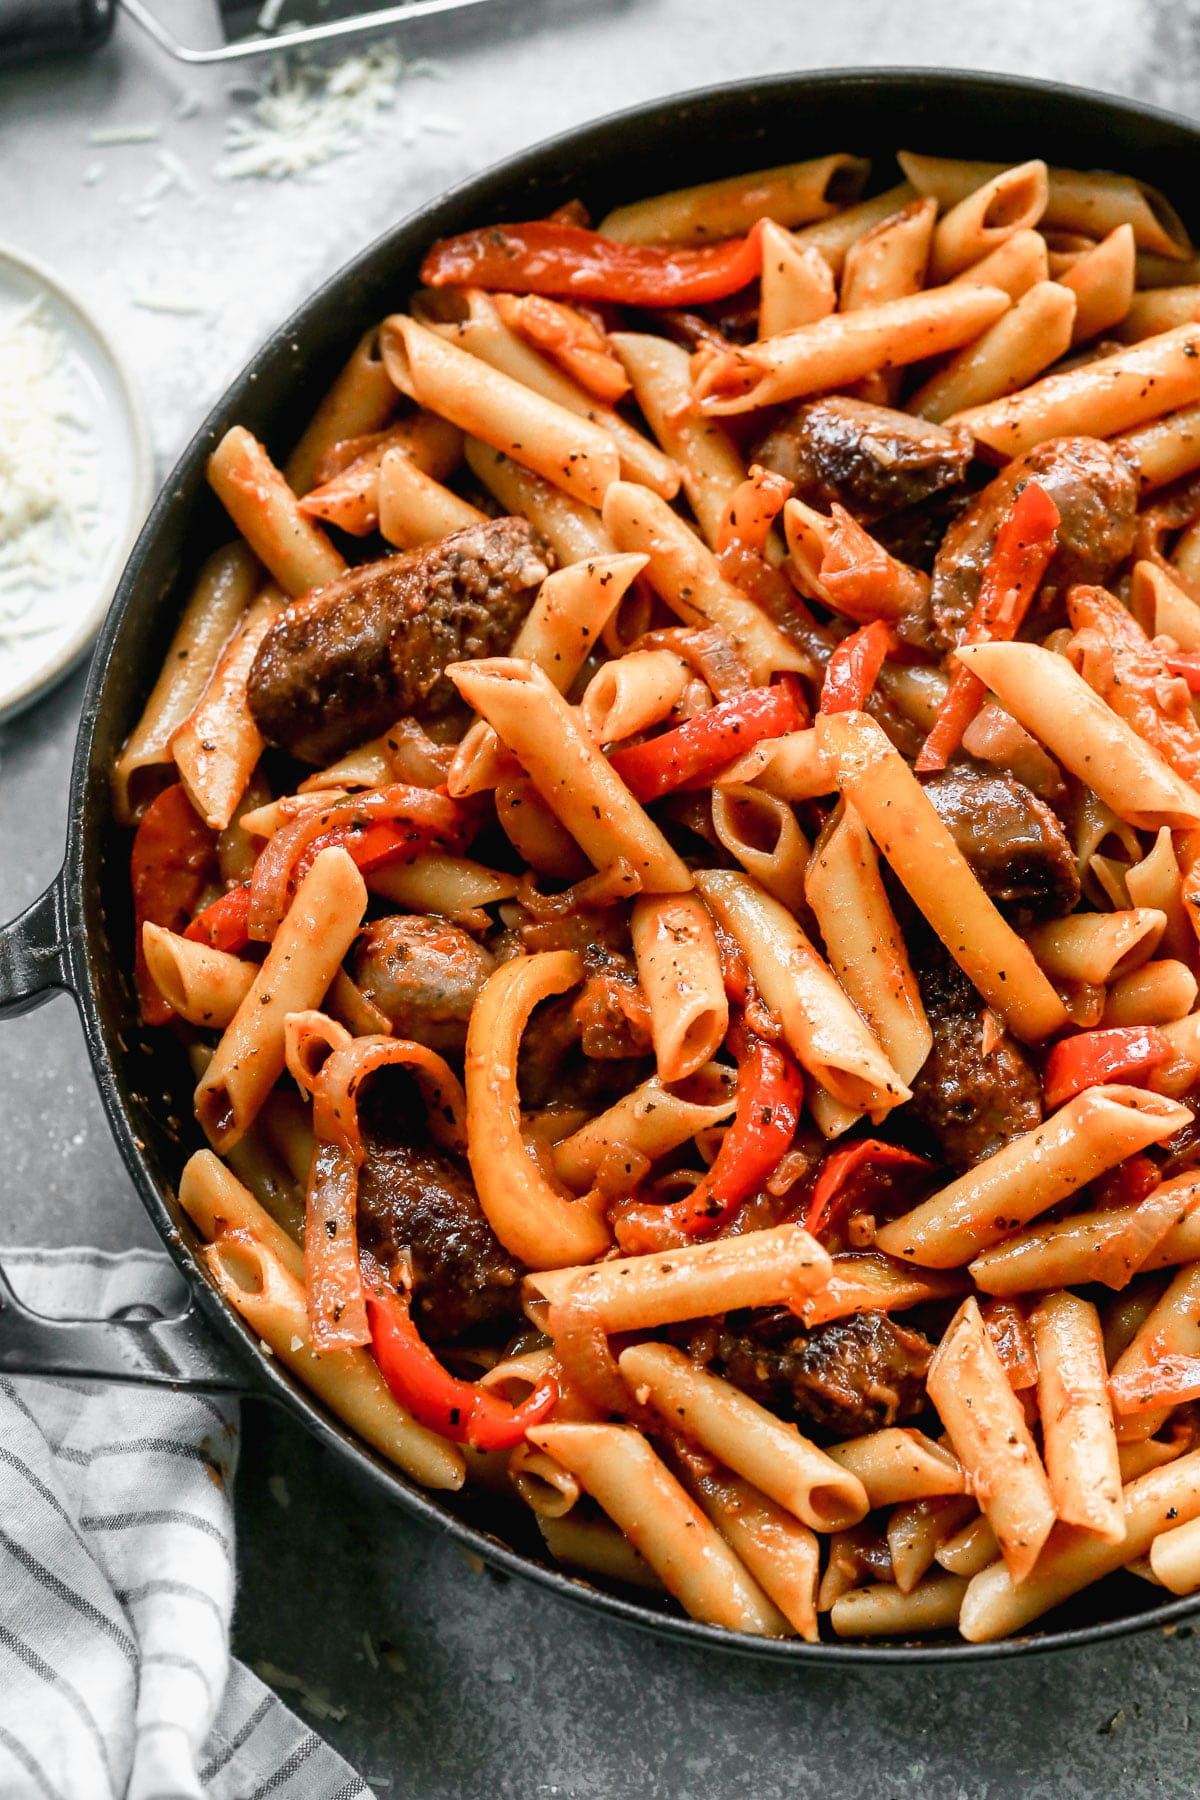 Italian Sausage and Peppers Pasta - Cooking for Keeps